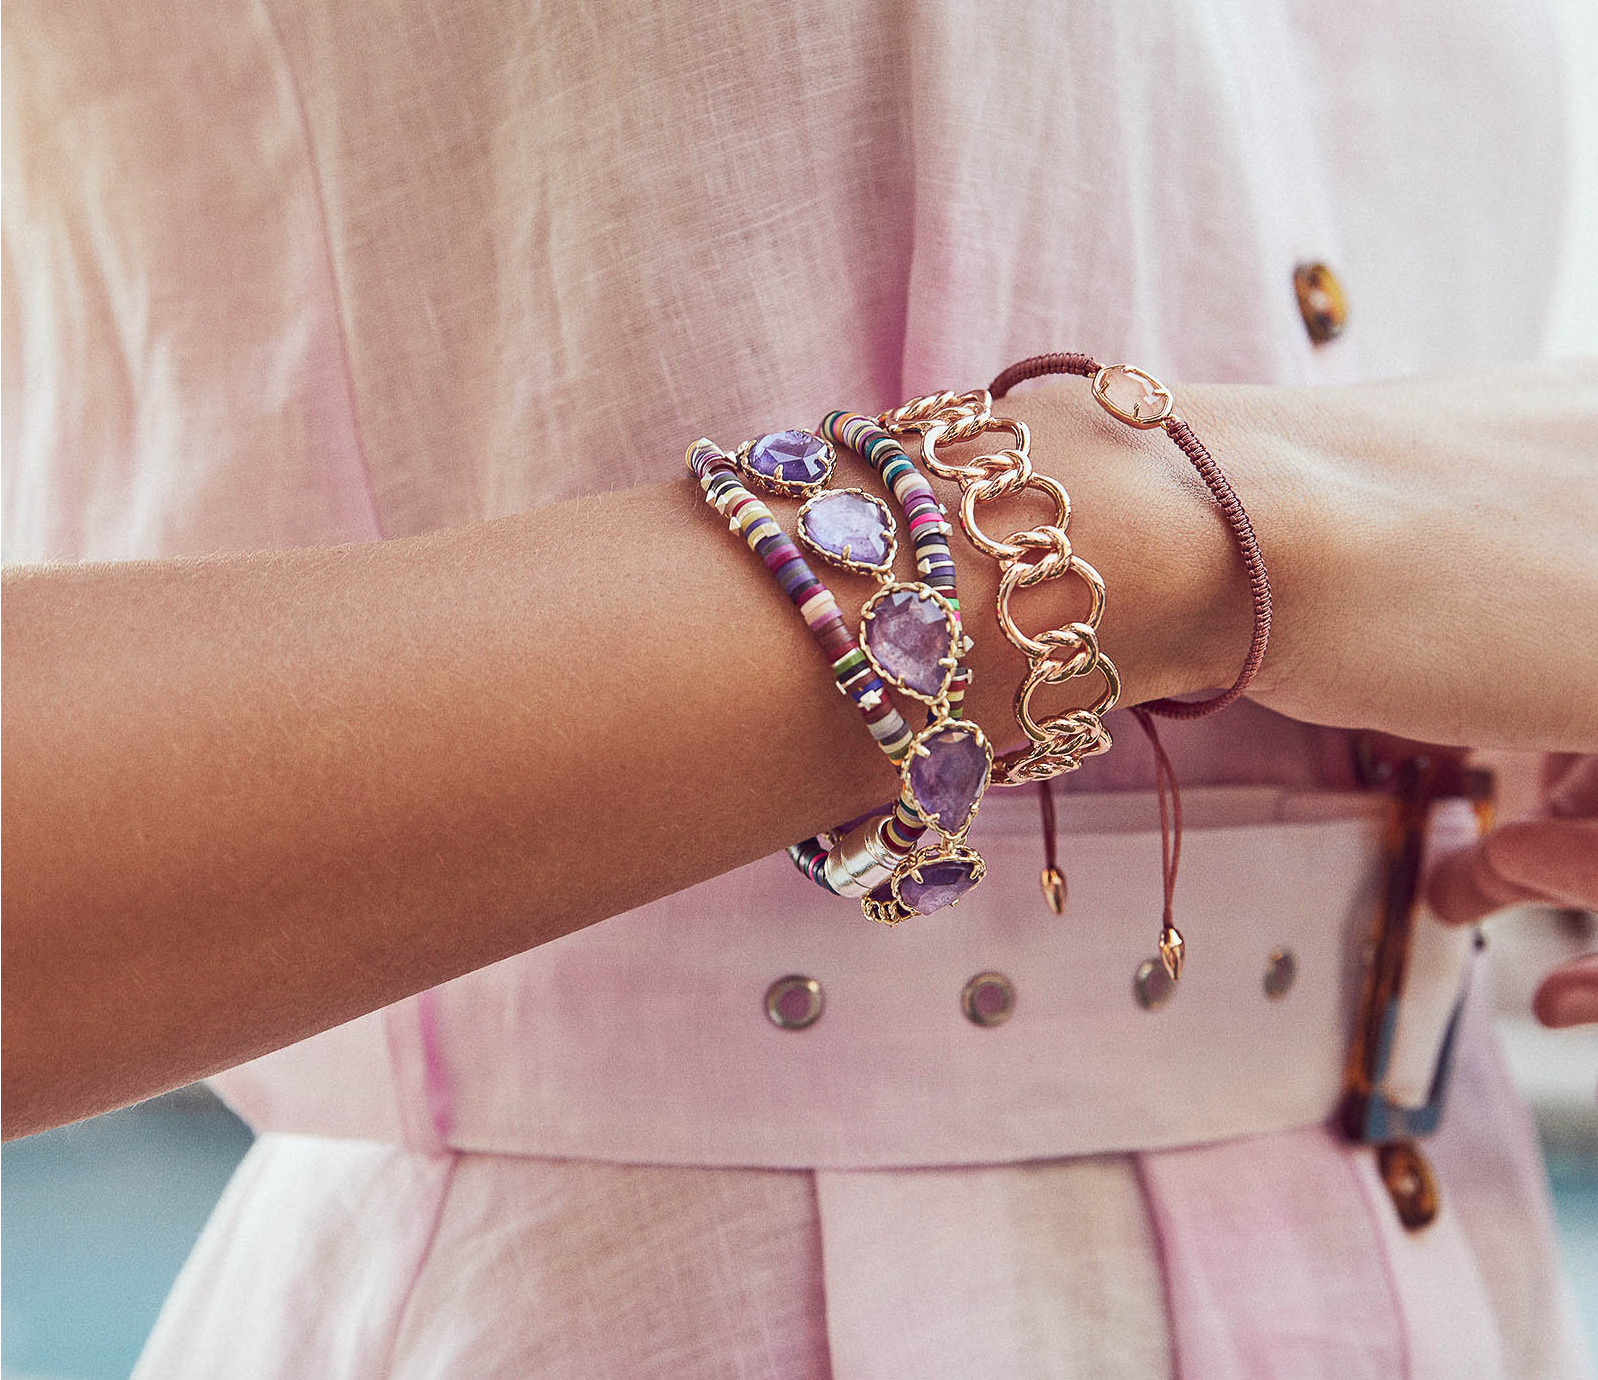 How to Style a Silver Bracelet for Girls: Tips and Tricks